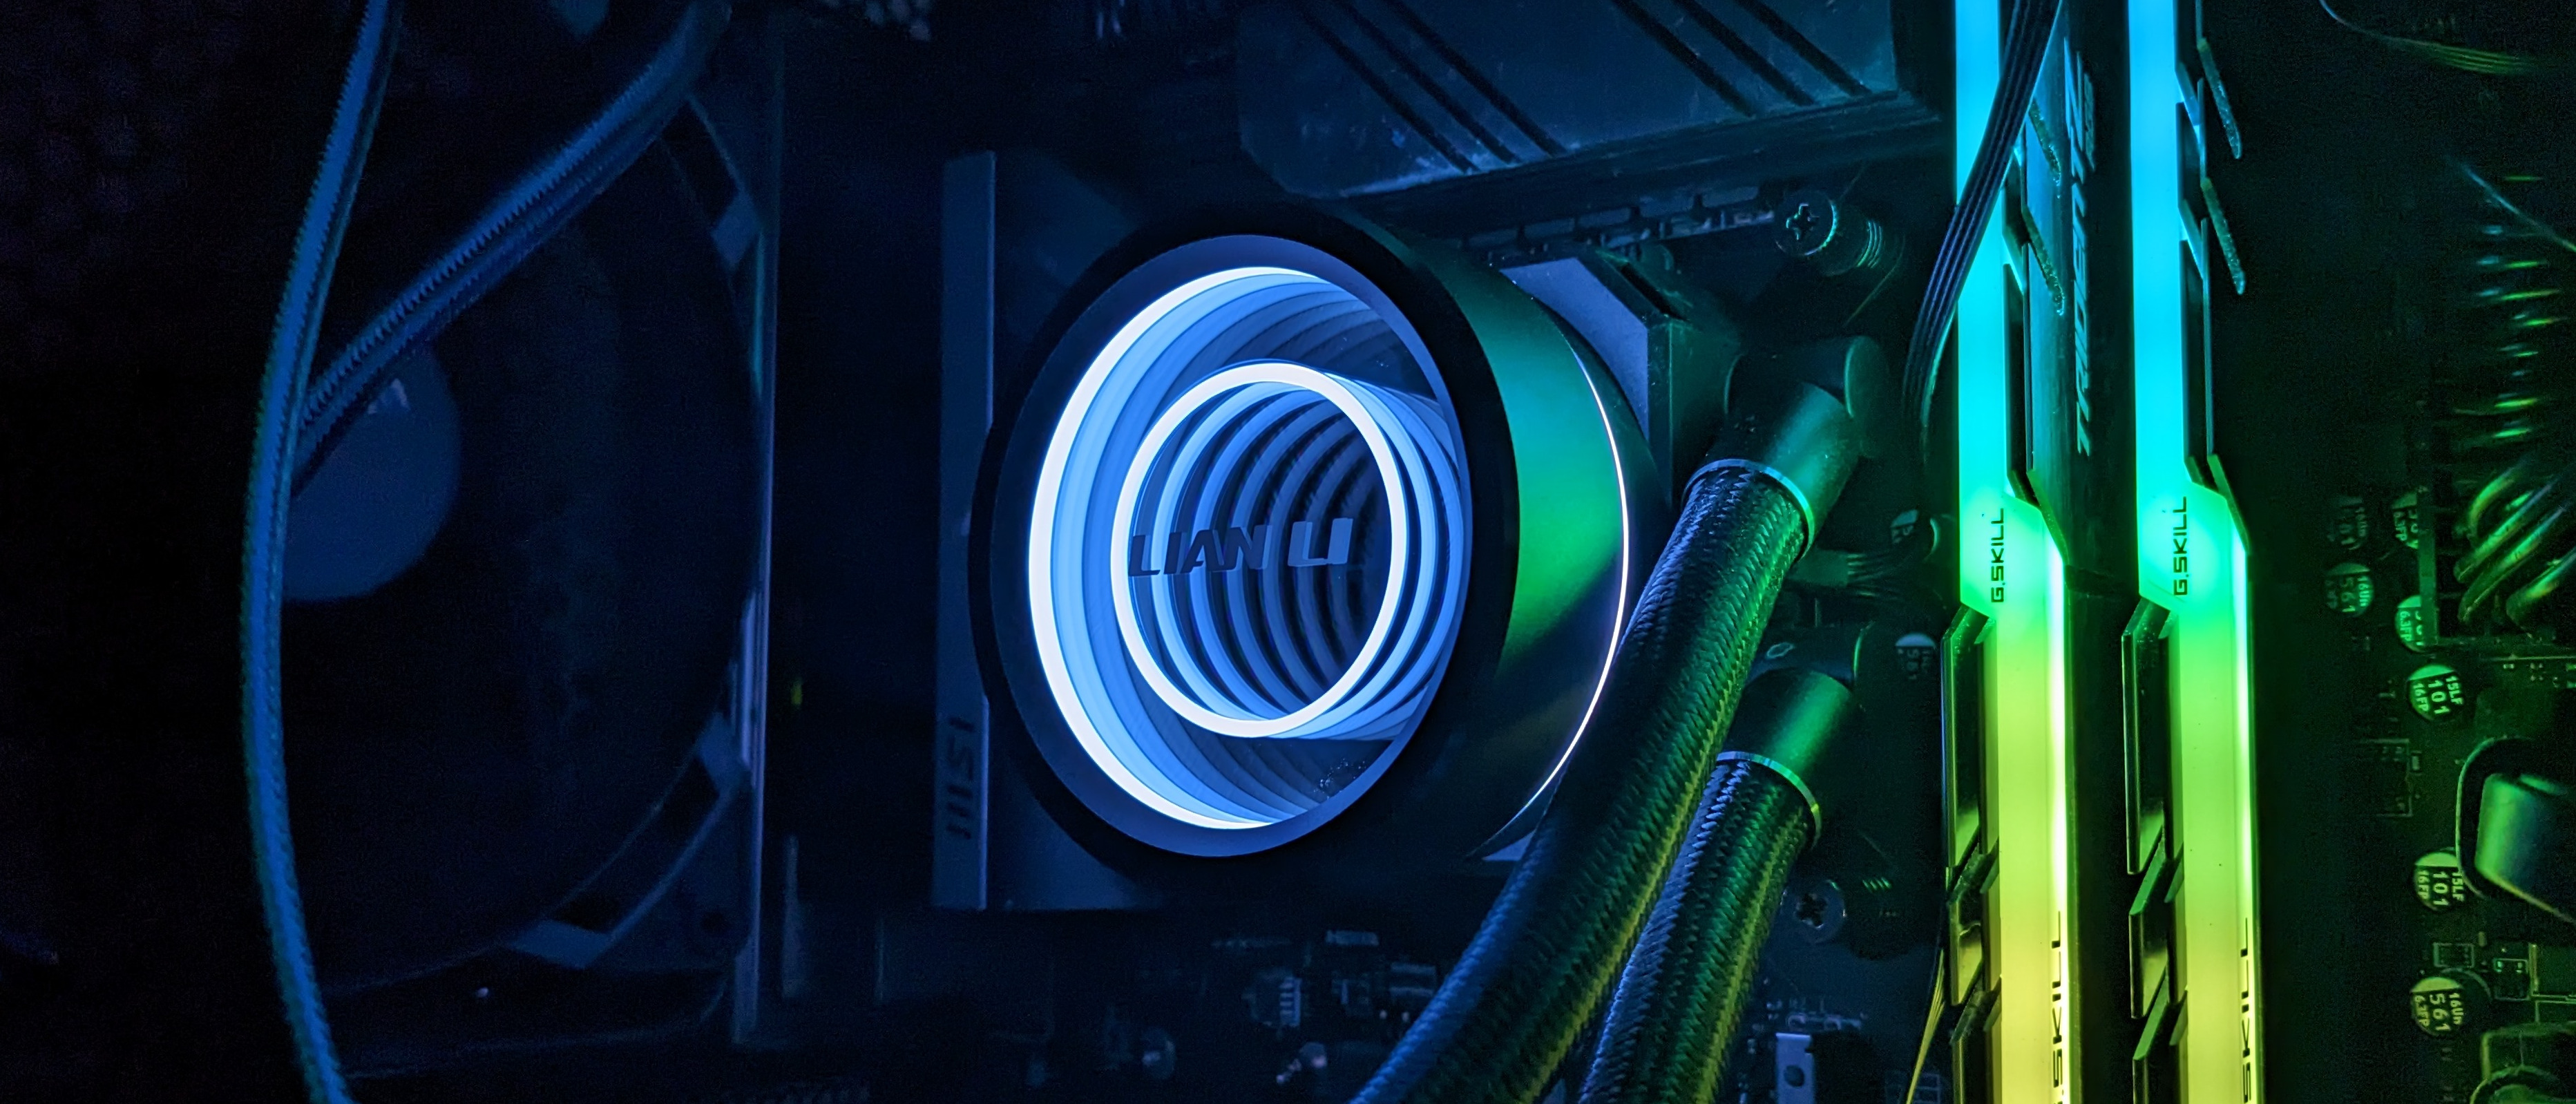 EK AIO 360 & 240 D-RGB Cooler Review: Thermals, Noise, Coldplate Levelness